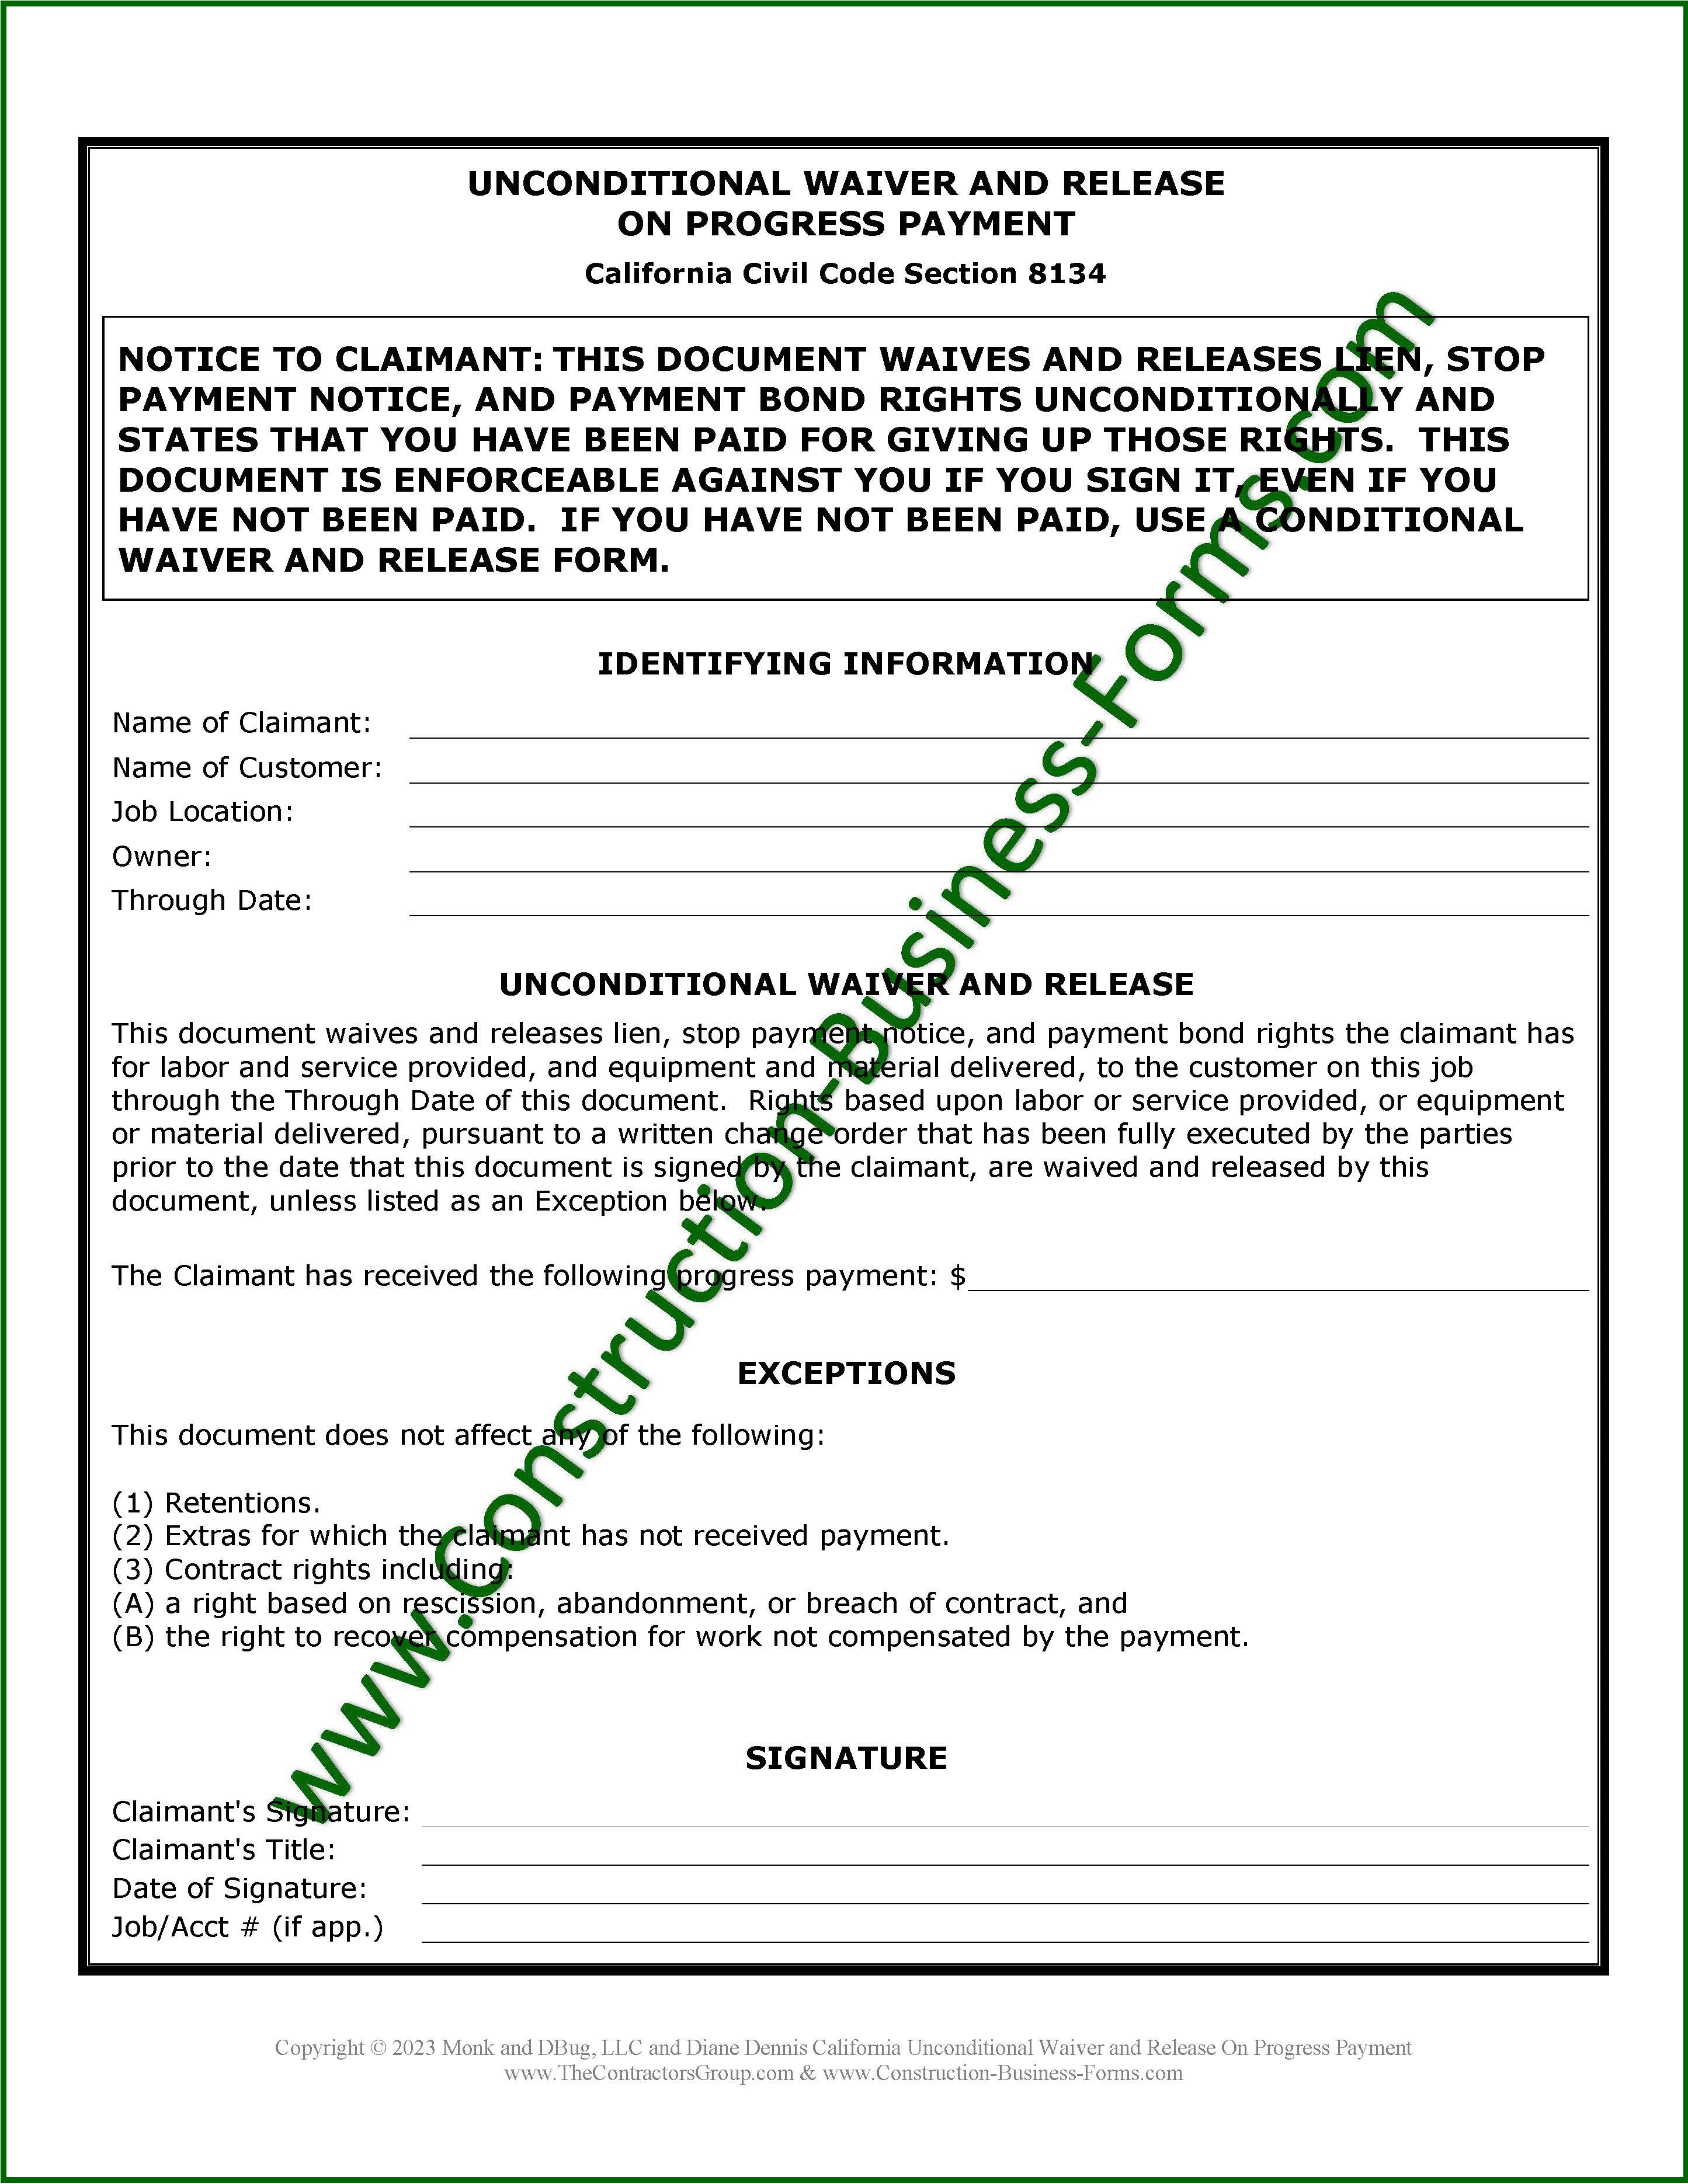 Image of Unconditional Lien Waiver Release On Progress Payment form for California